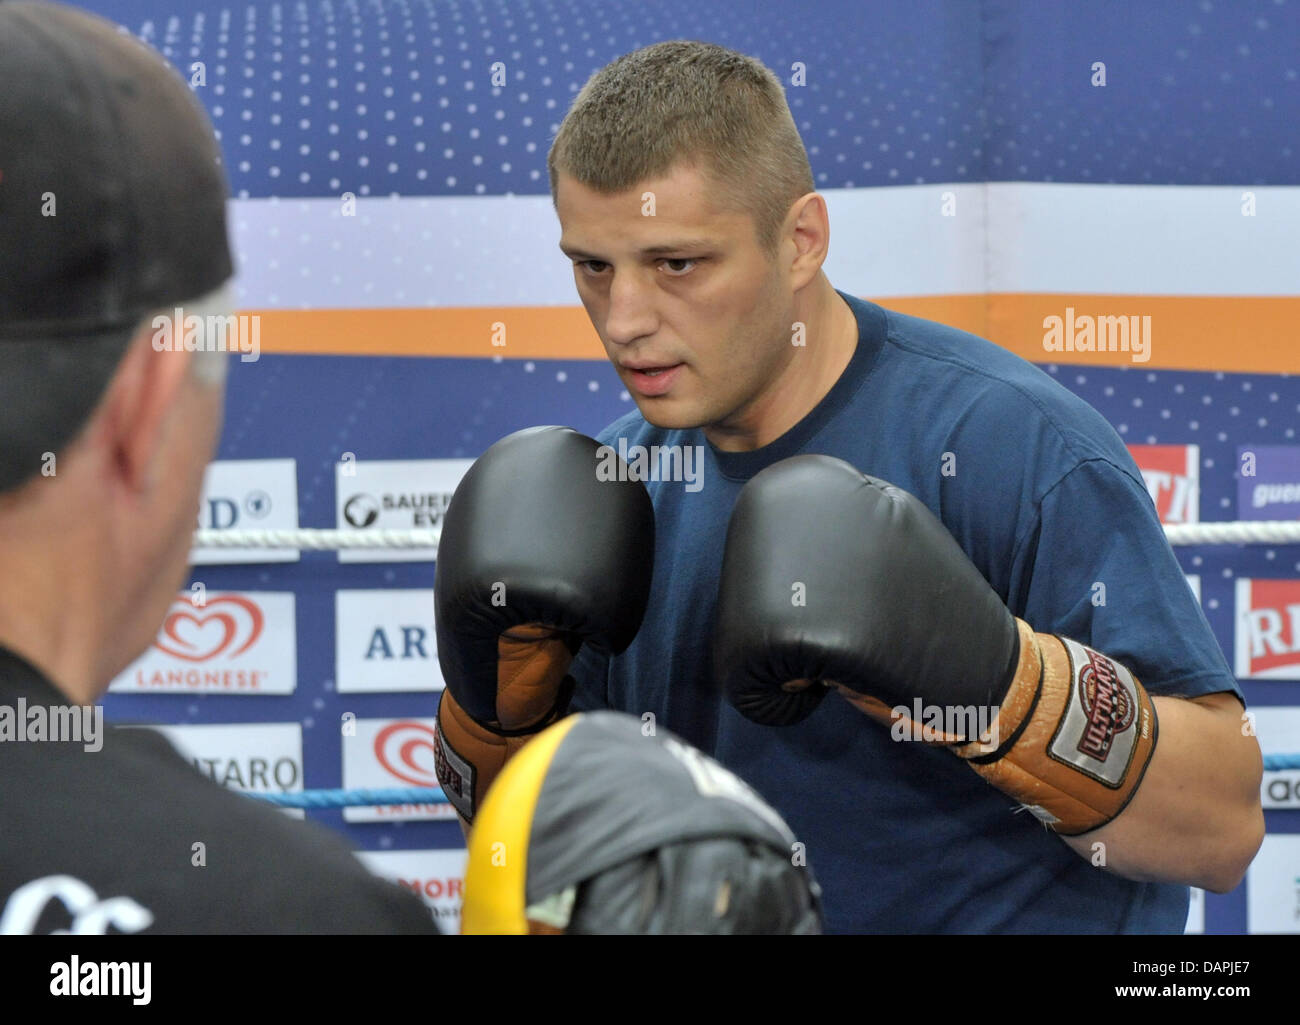 Professional boxer Siarhei Liakhovich (Belarus) practices with his coach  Kenneth Weldon during a public practice session before the WBA/WBO  heavyweight intercontinental championship at the exhibition hall in Erfurt  in Erfurt, Germany, 23